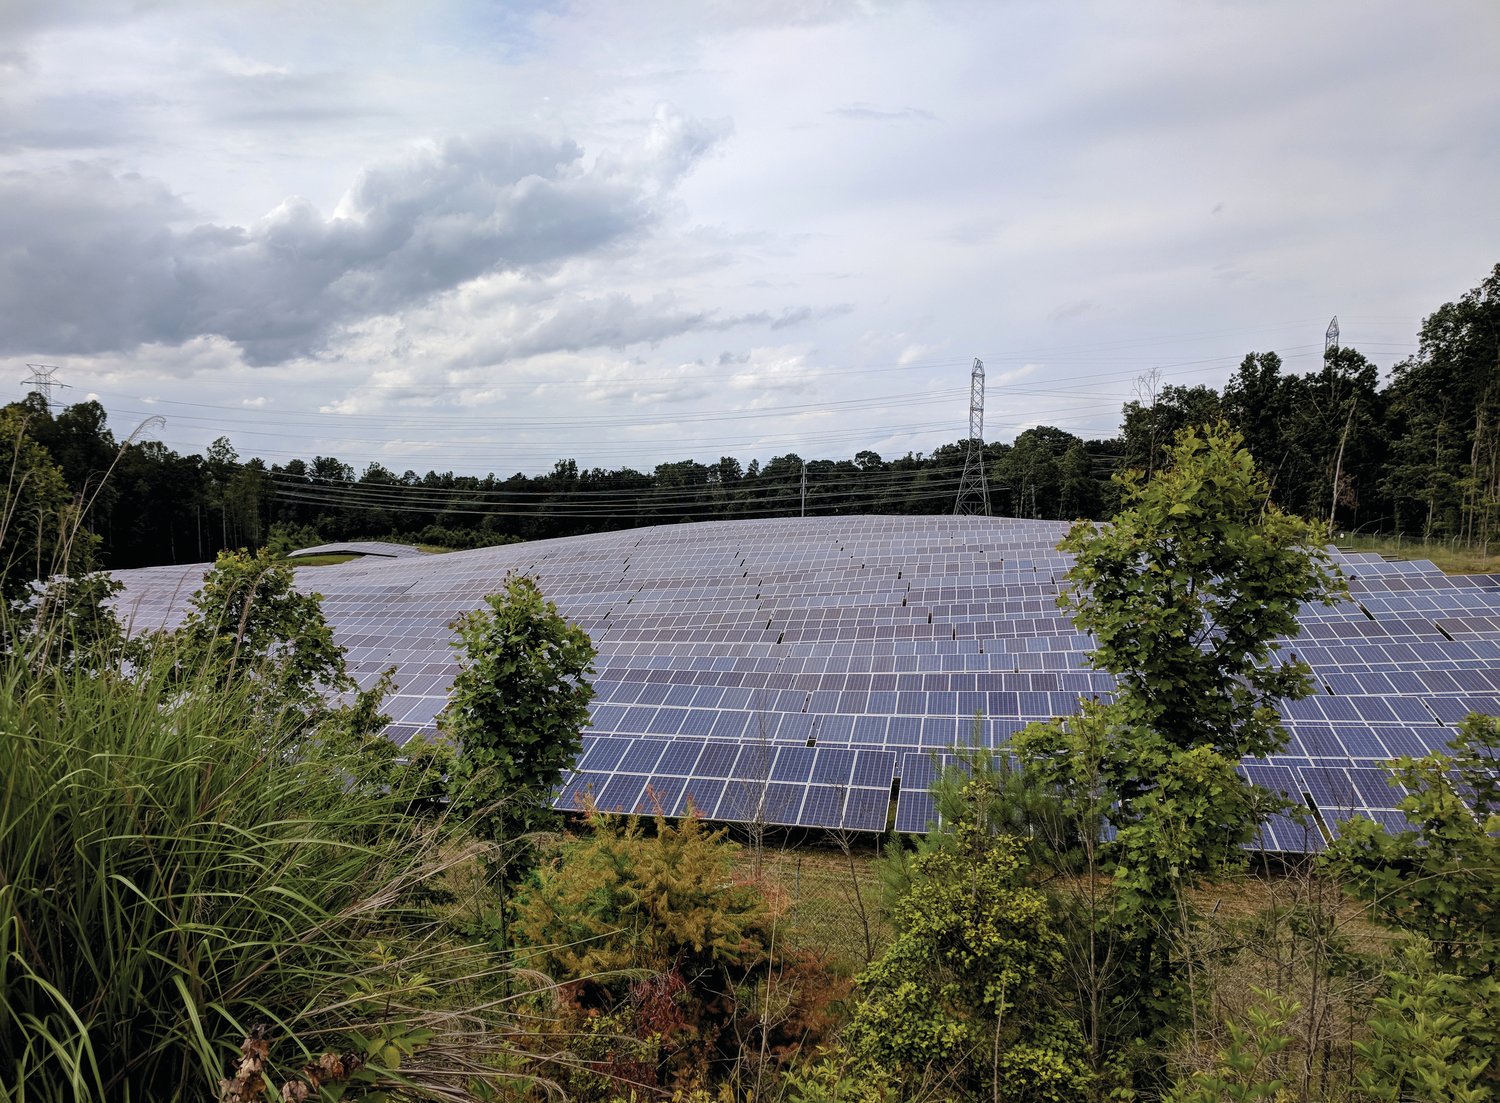 Pictured is a solar project owned by Arevon in North Carolina which is similar to what’s proposed in this area.